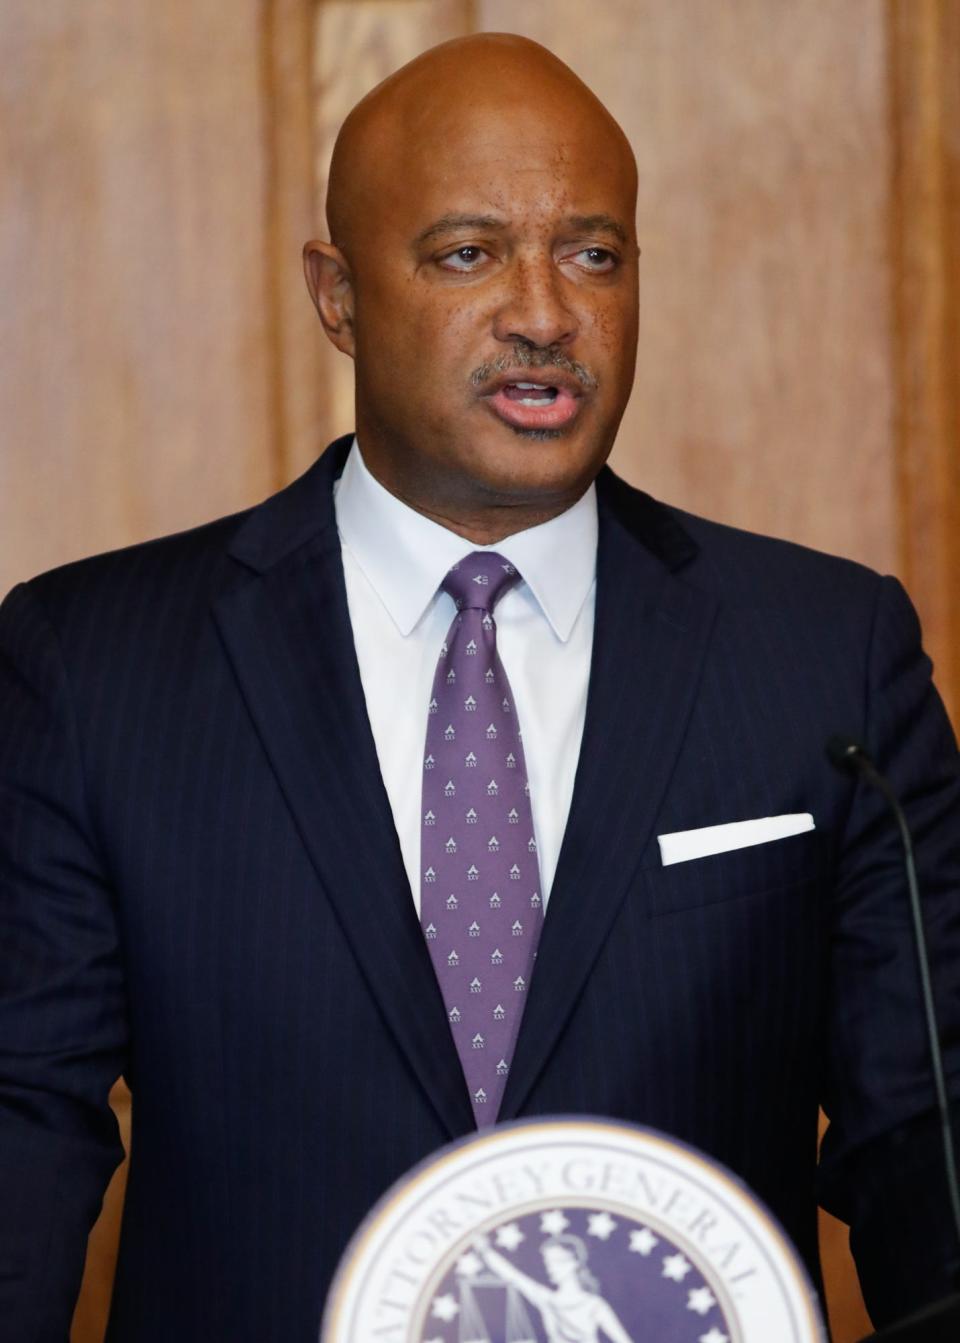 Indiana Attorney General Curtis Hill holds a press conference regarding the finding of more than 2,000 fetal remains in the Illinois home of deceased former Indiana abortion doctor,  Ulrich Klopfer, at the Indiana Statehouse on Friday, Sept. 20, 2019. 